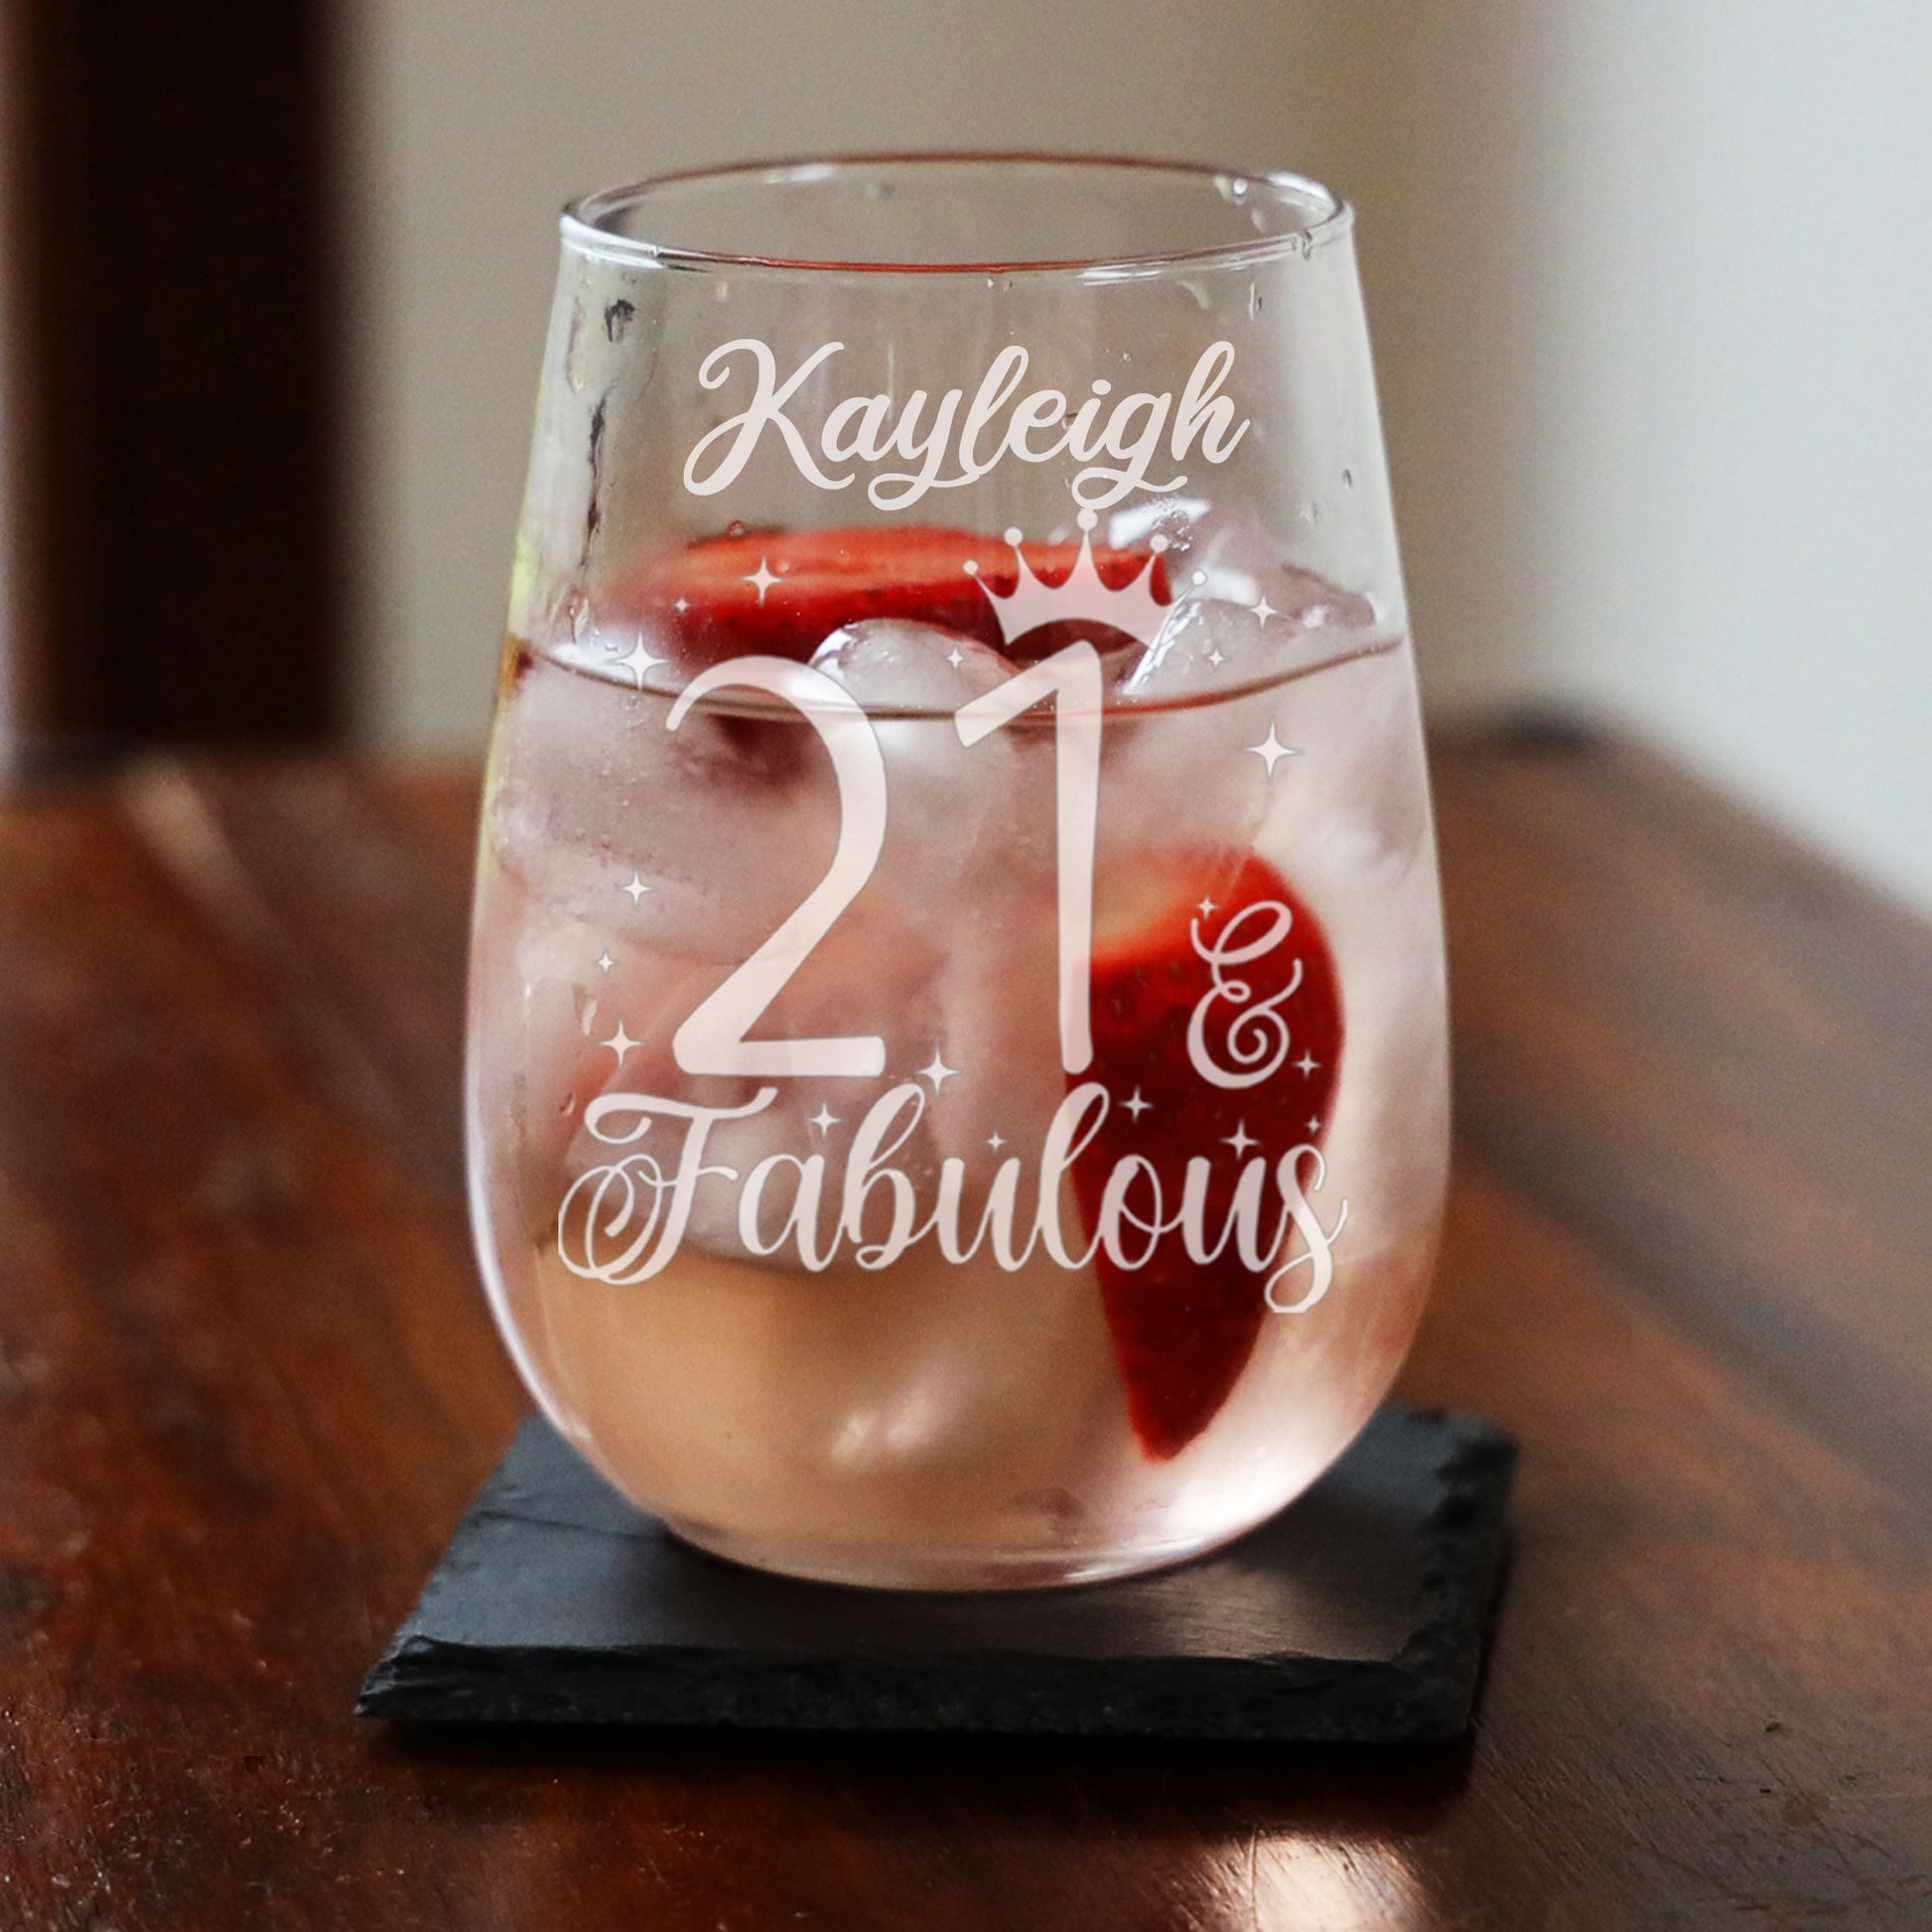 21 & Fabulous Engraved Stemless Gin Glass and/or Coaster Set  - Always Looking Good -   